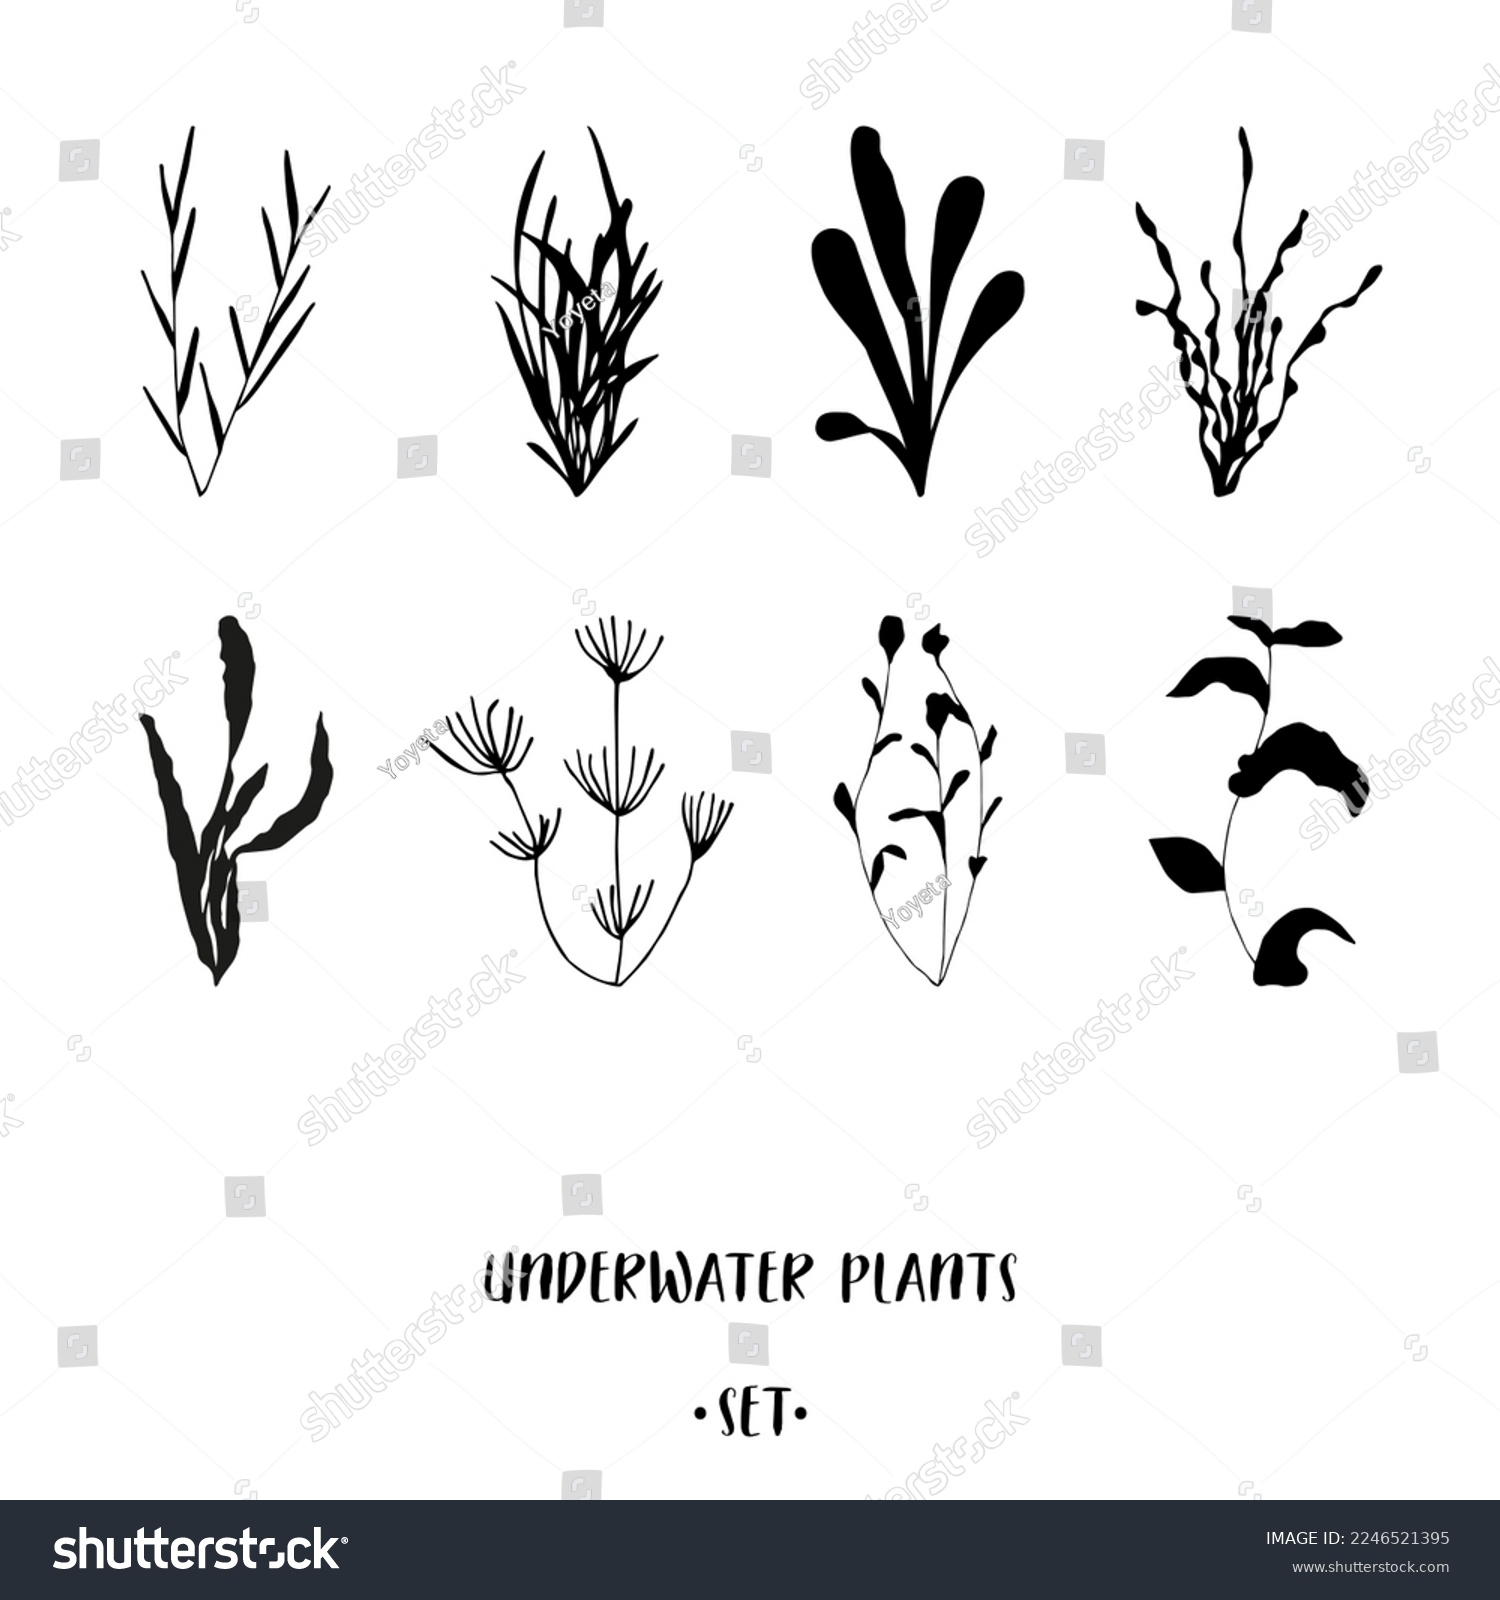 SVG of Underwater plants in black on white background. Hand drawn submerged sea and ocean weeds set for advertising and promotion such as logo, T-shirt and cap placement prints, stickers, banners, flyers svg